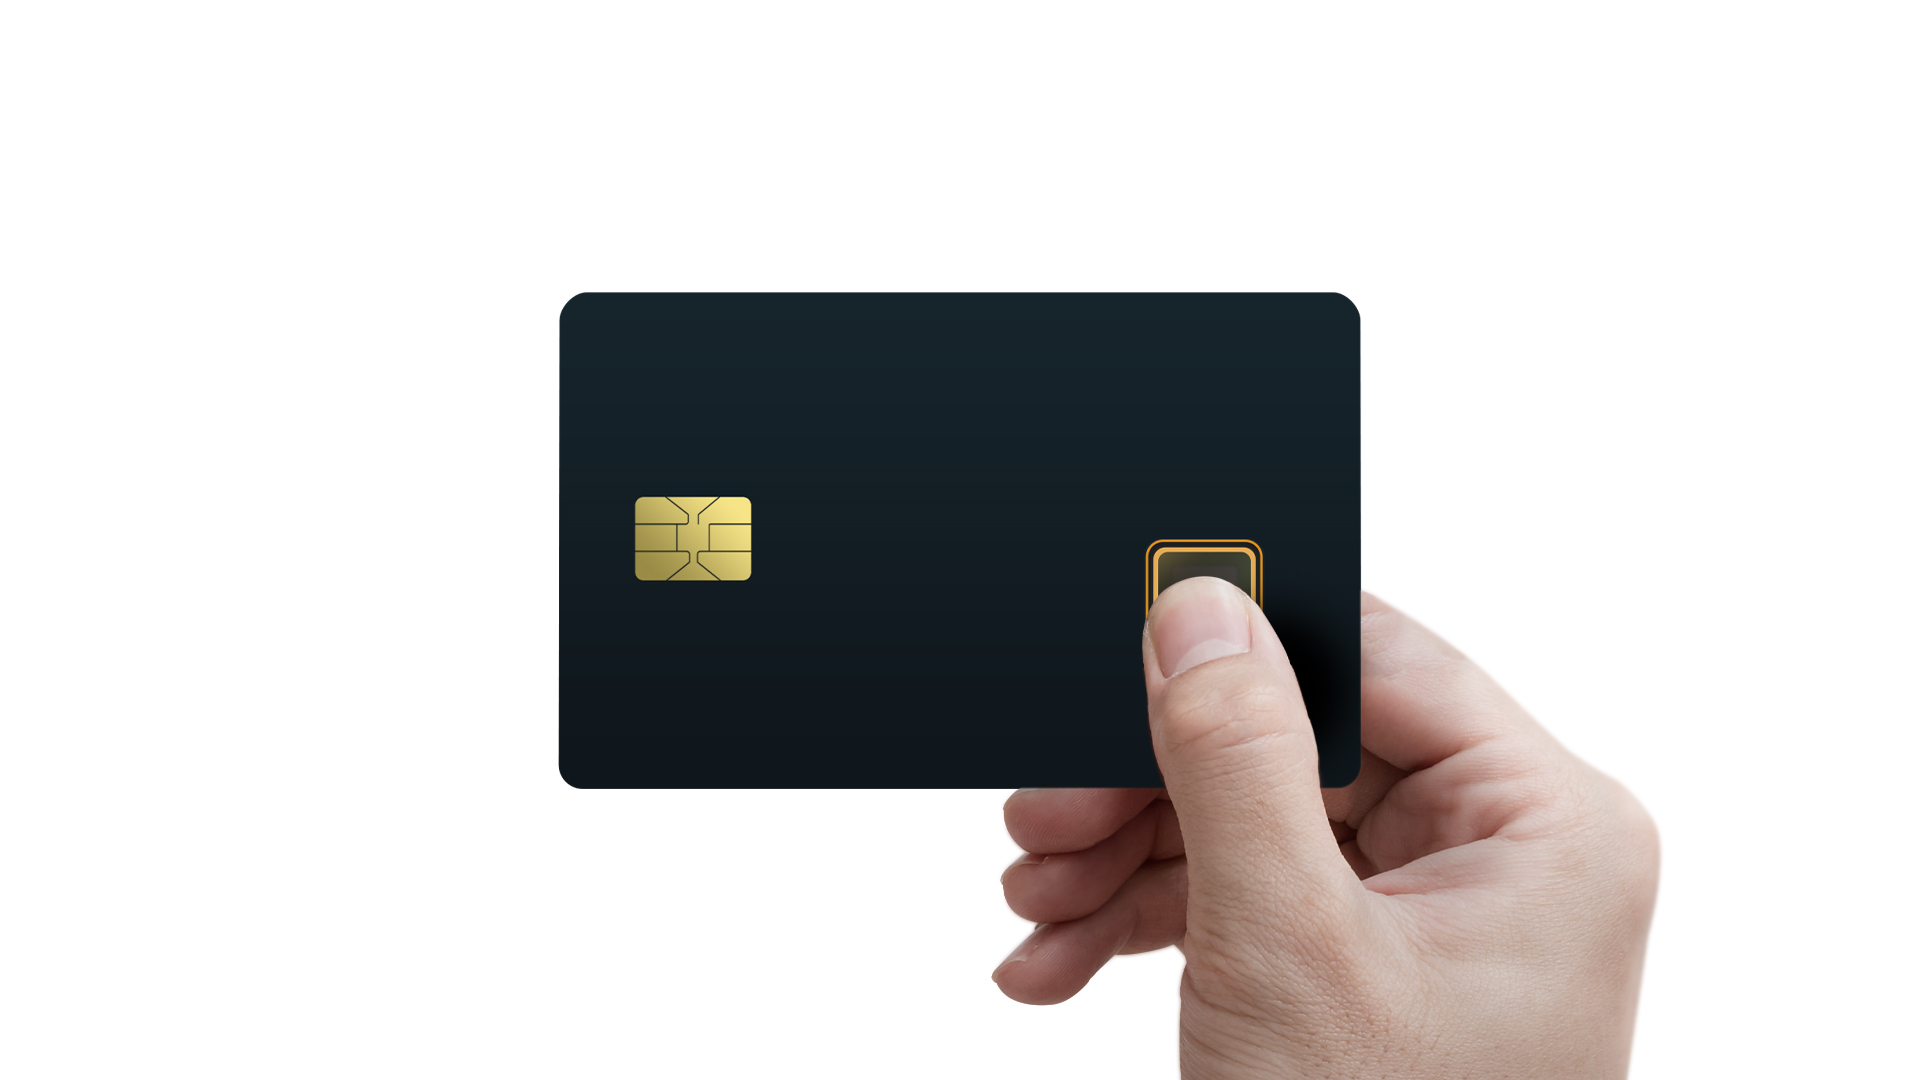 Samsung launches new security IC solution for biometric payment cards